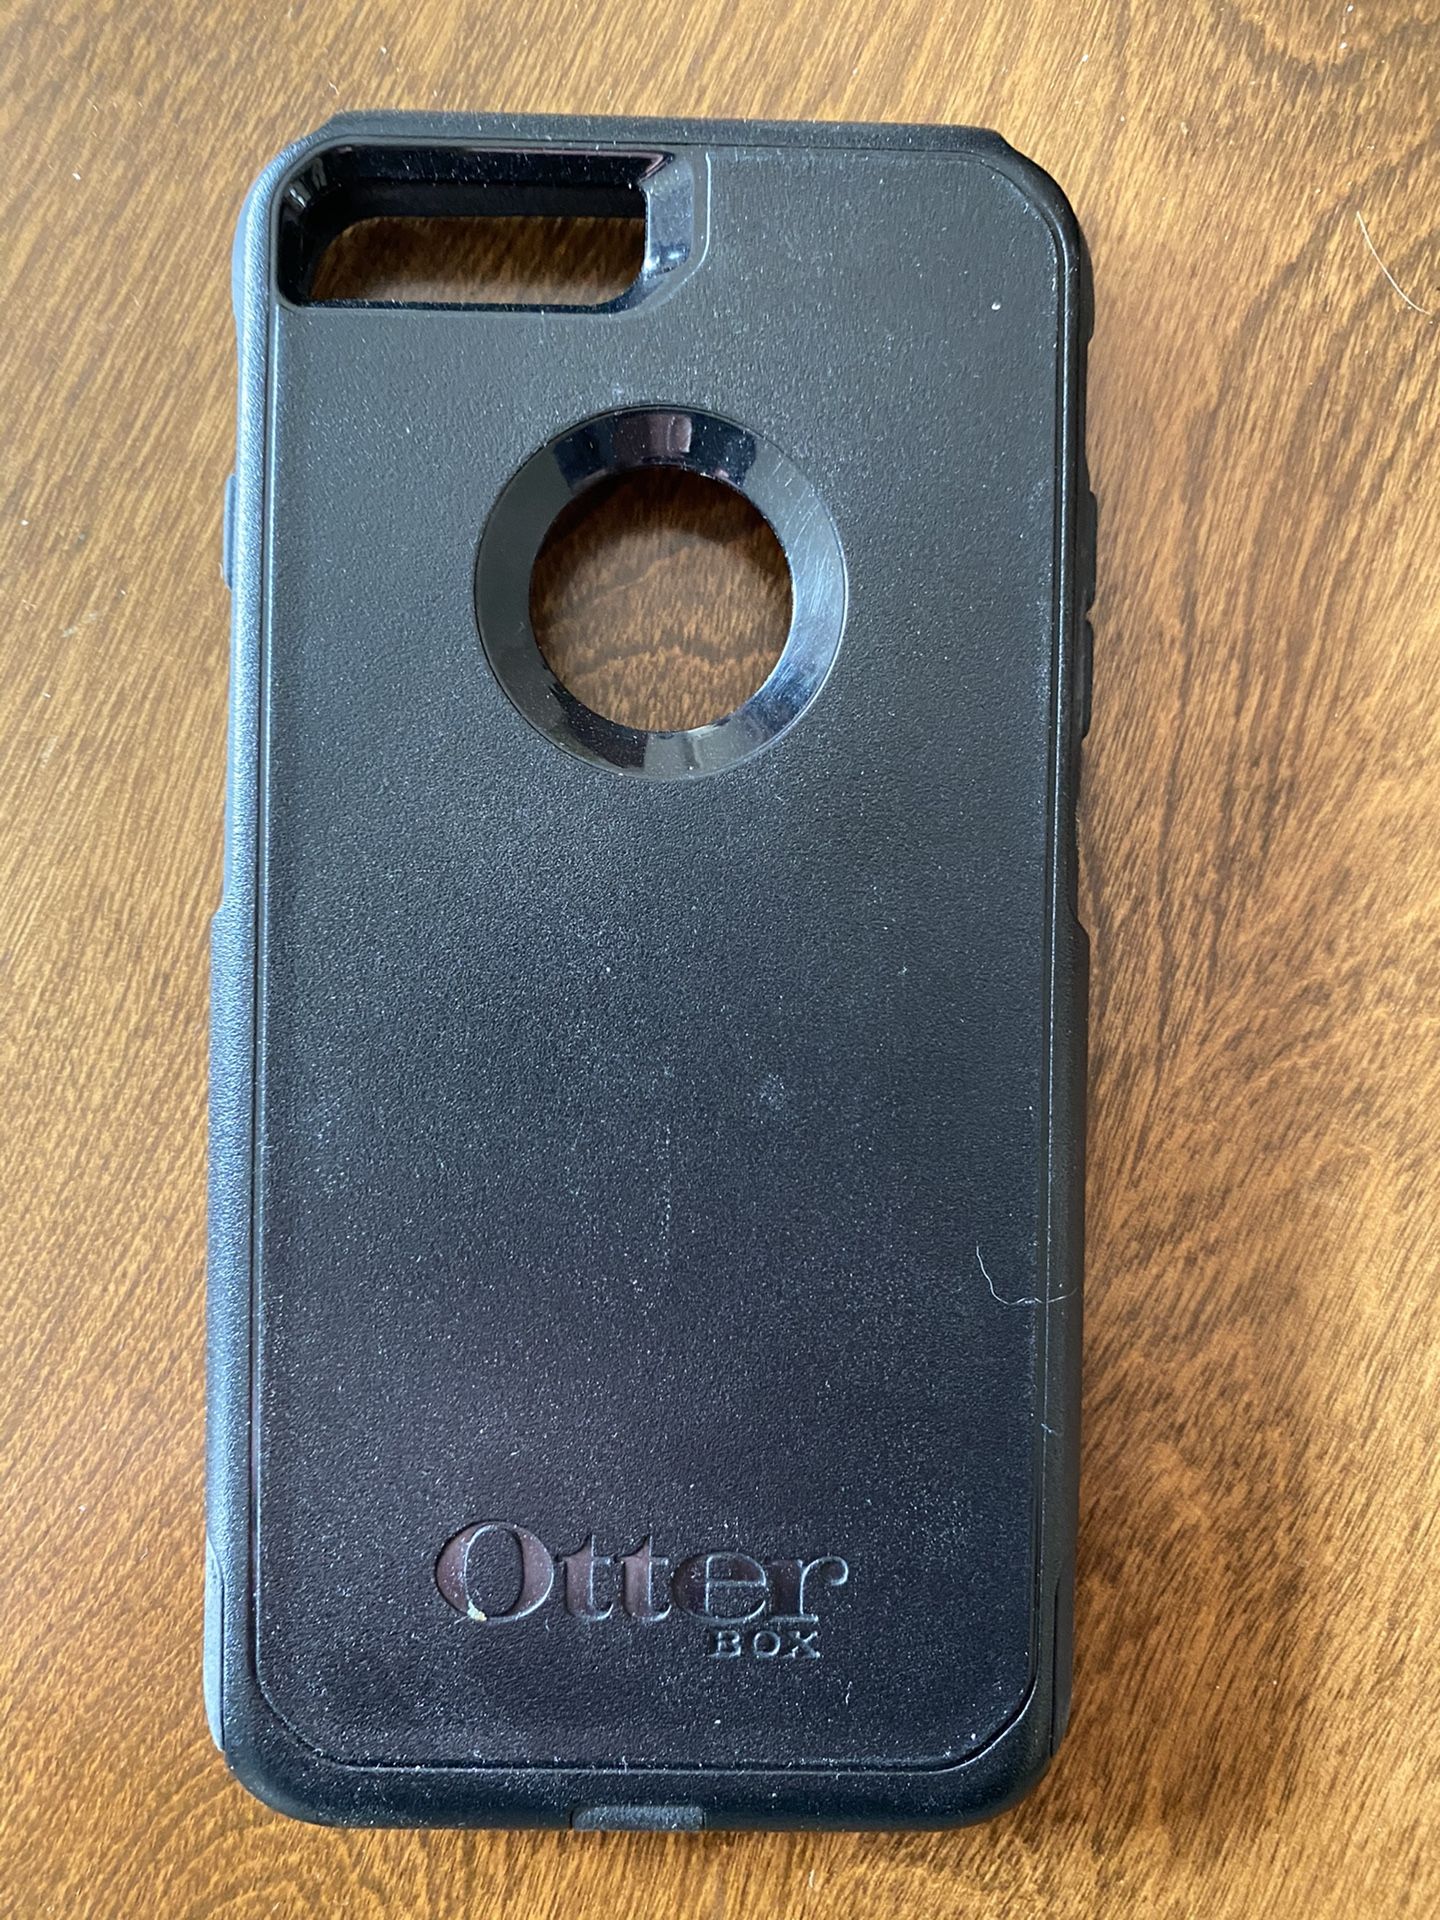 Otter box commuter for IPhone 7 Plus